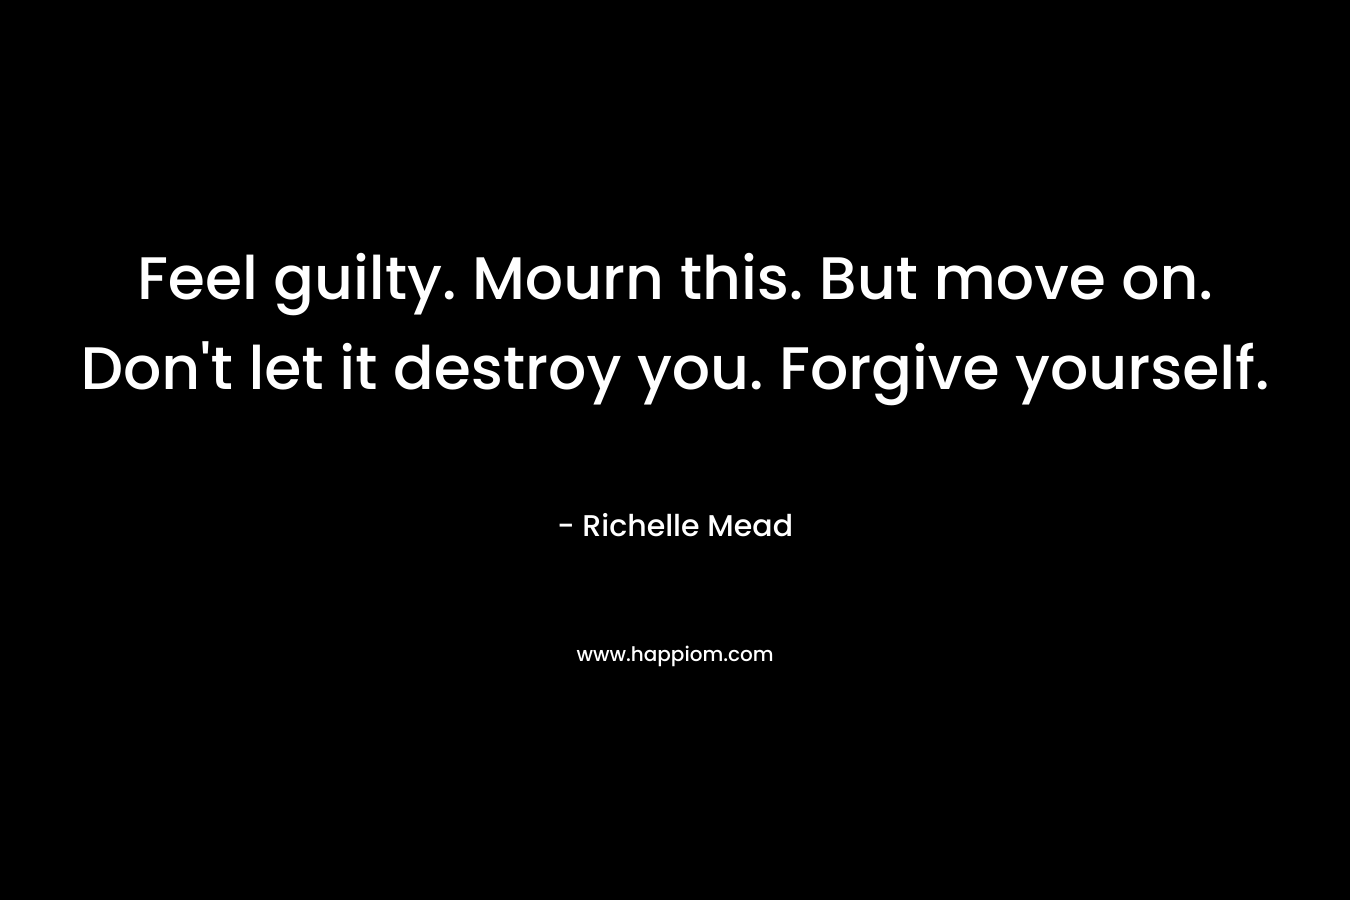 Feel guilty. Mourn this. But move on. Don’t let it destroy you. Forgive yourself. – Richelle Mead